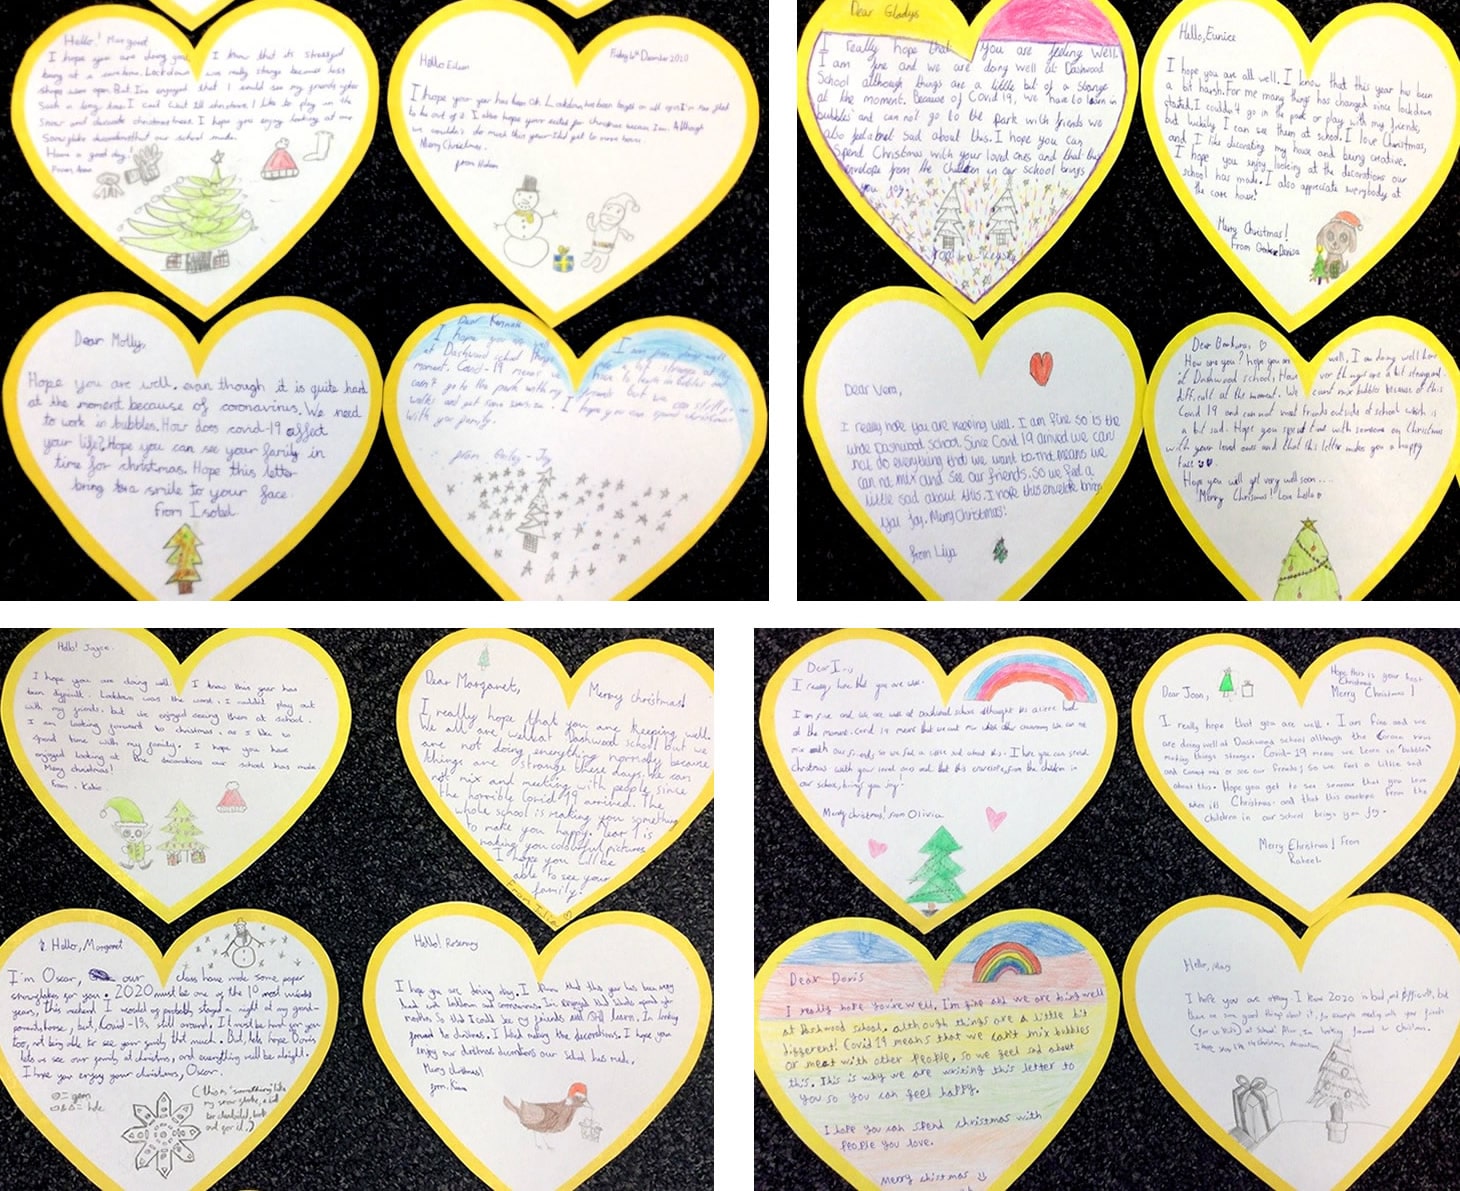 Messages from pupils